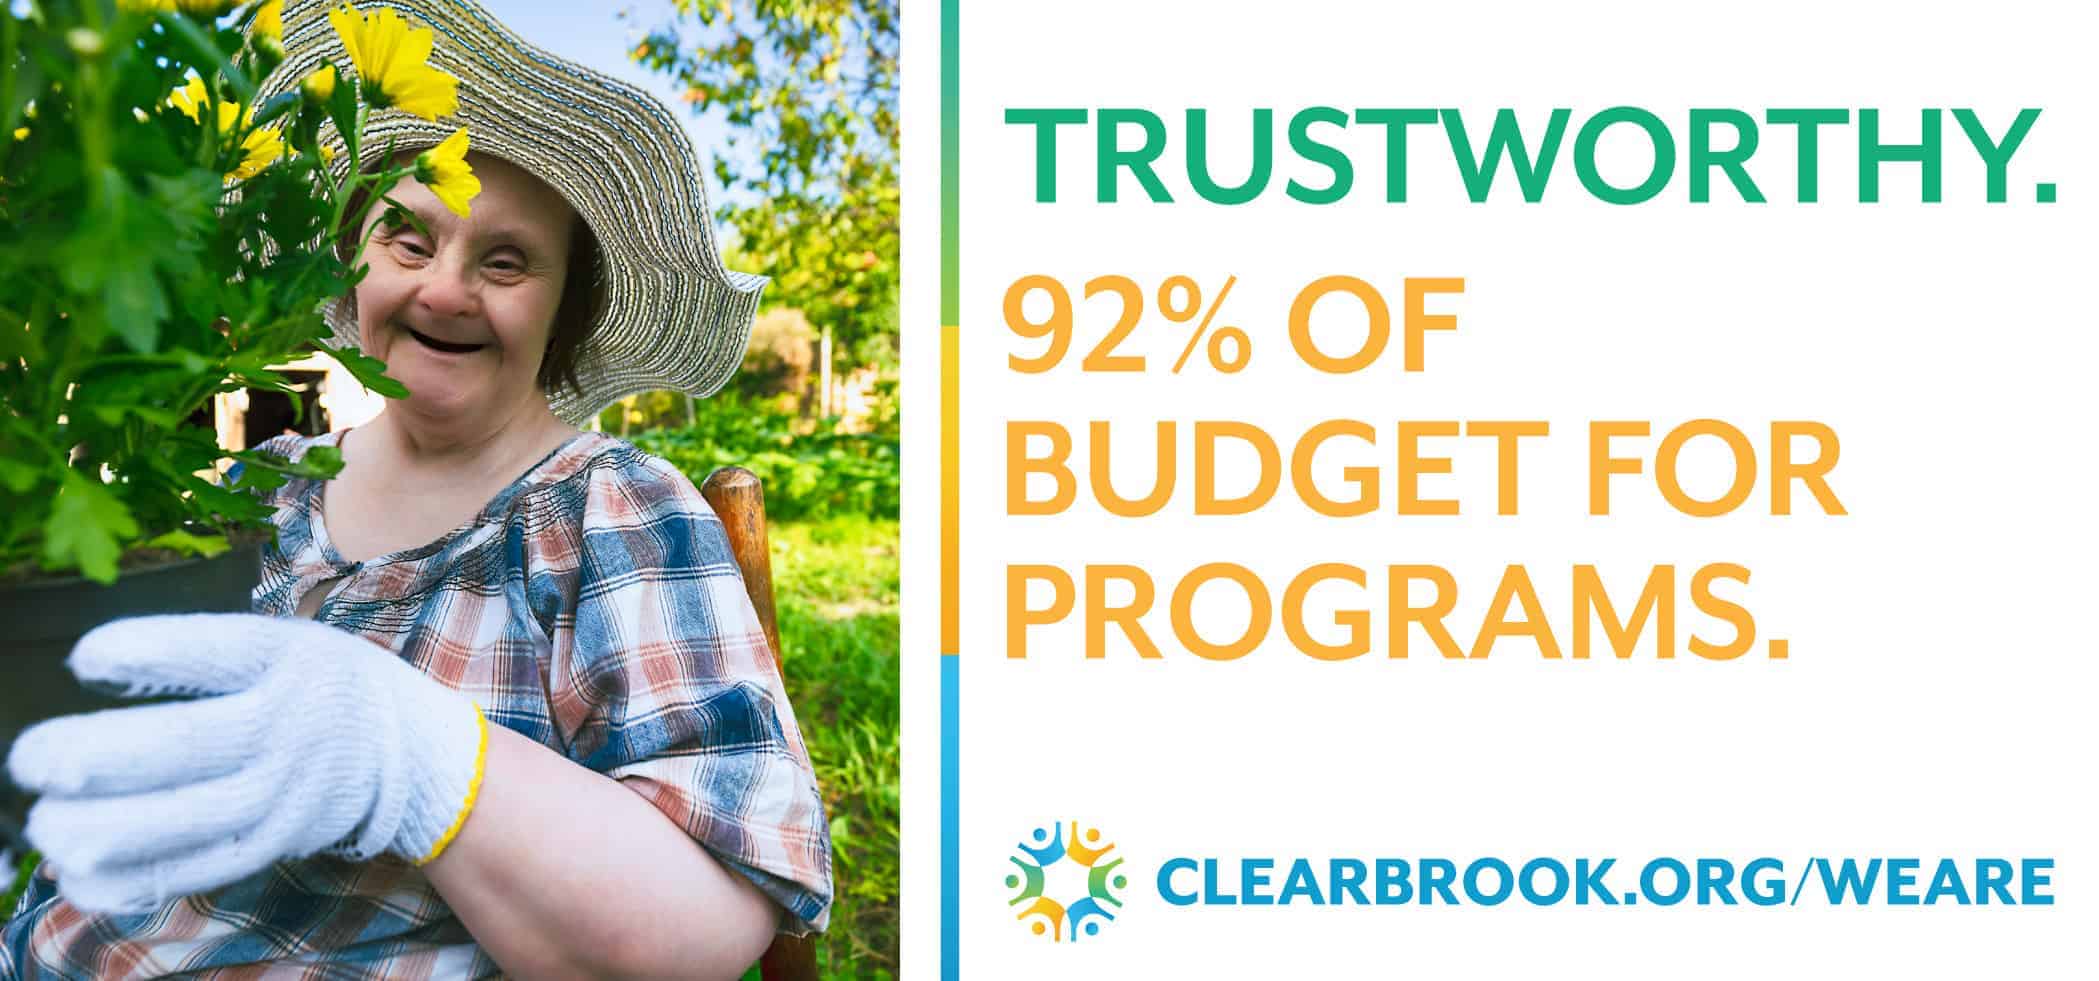 Clearbrook Trustworthy Campaign